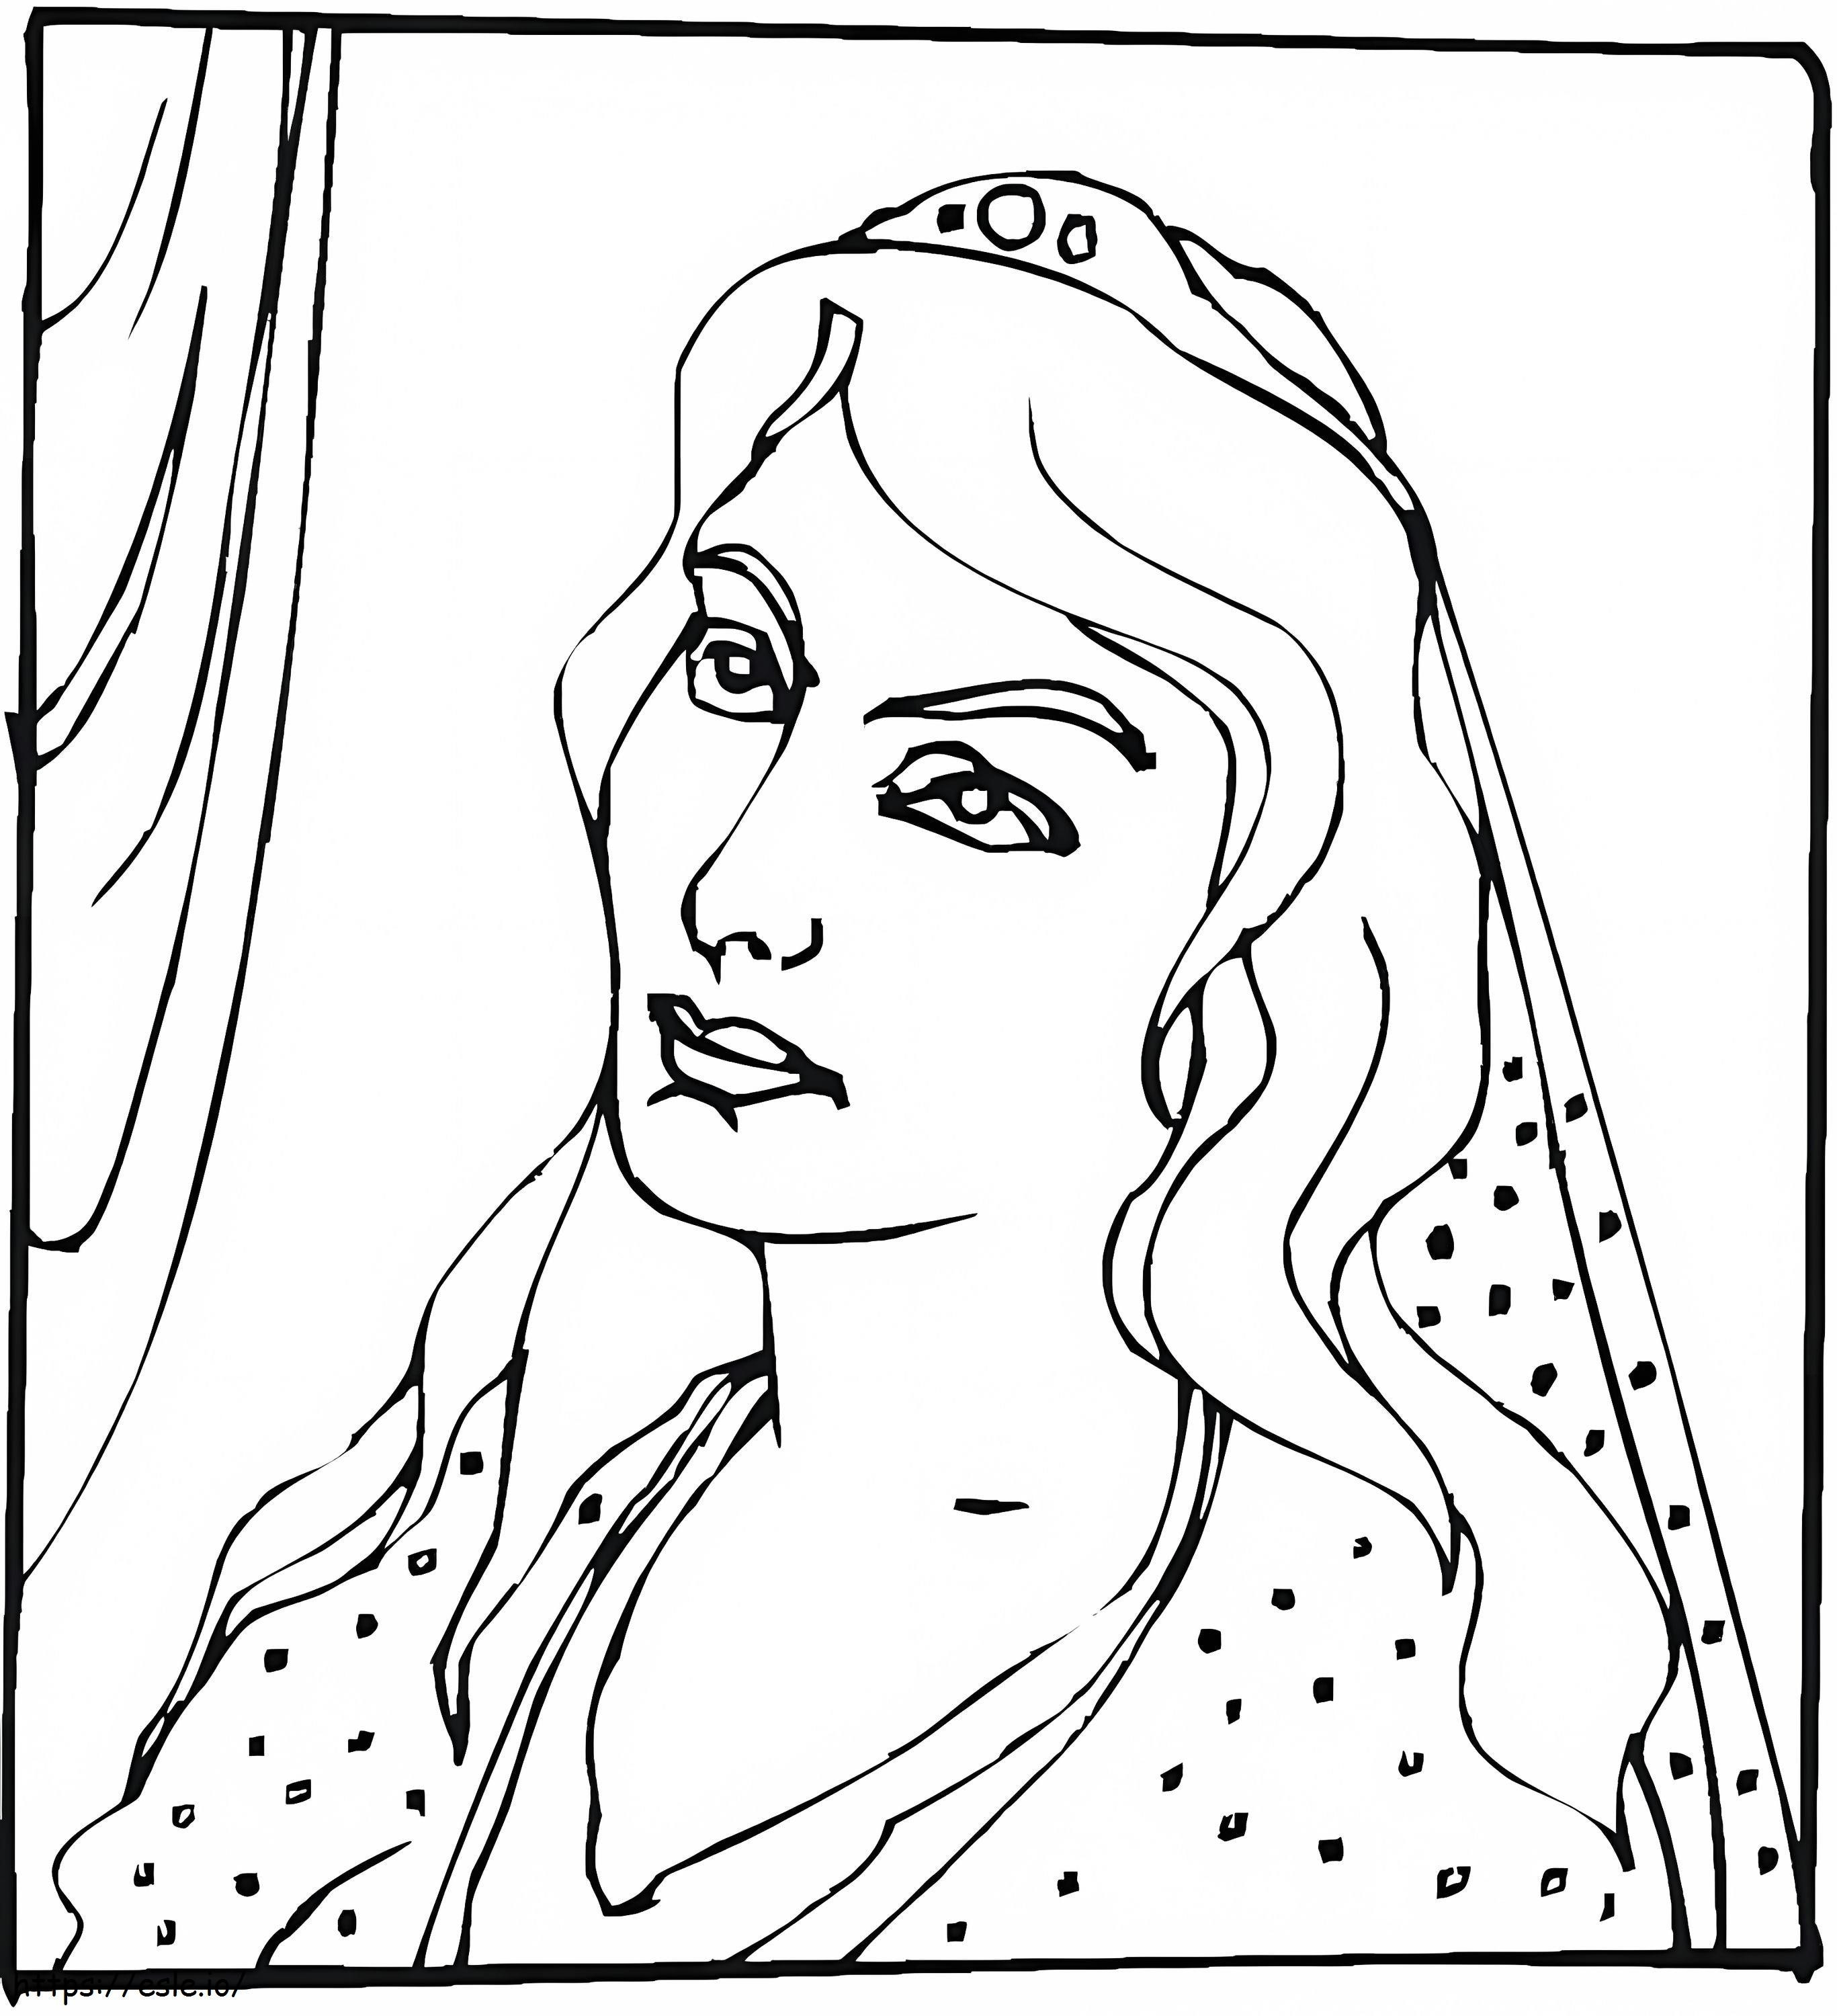 Queen Esther 4 coloring page